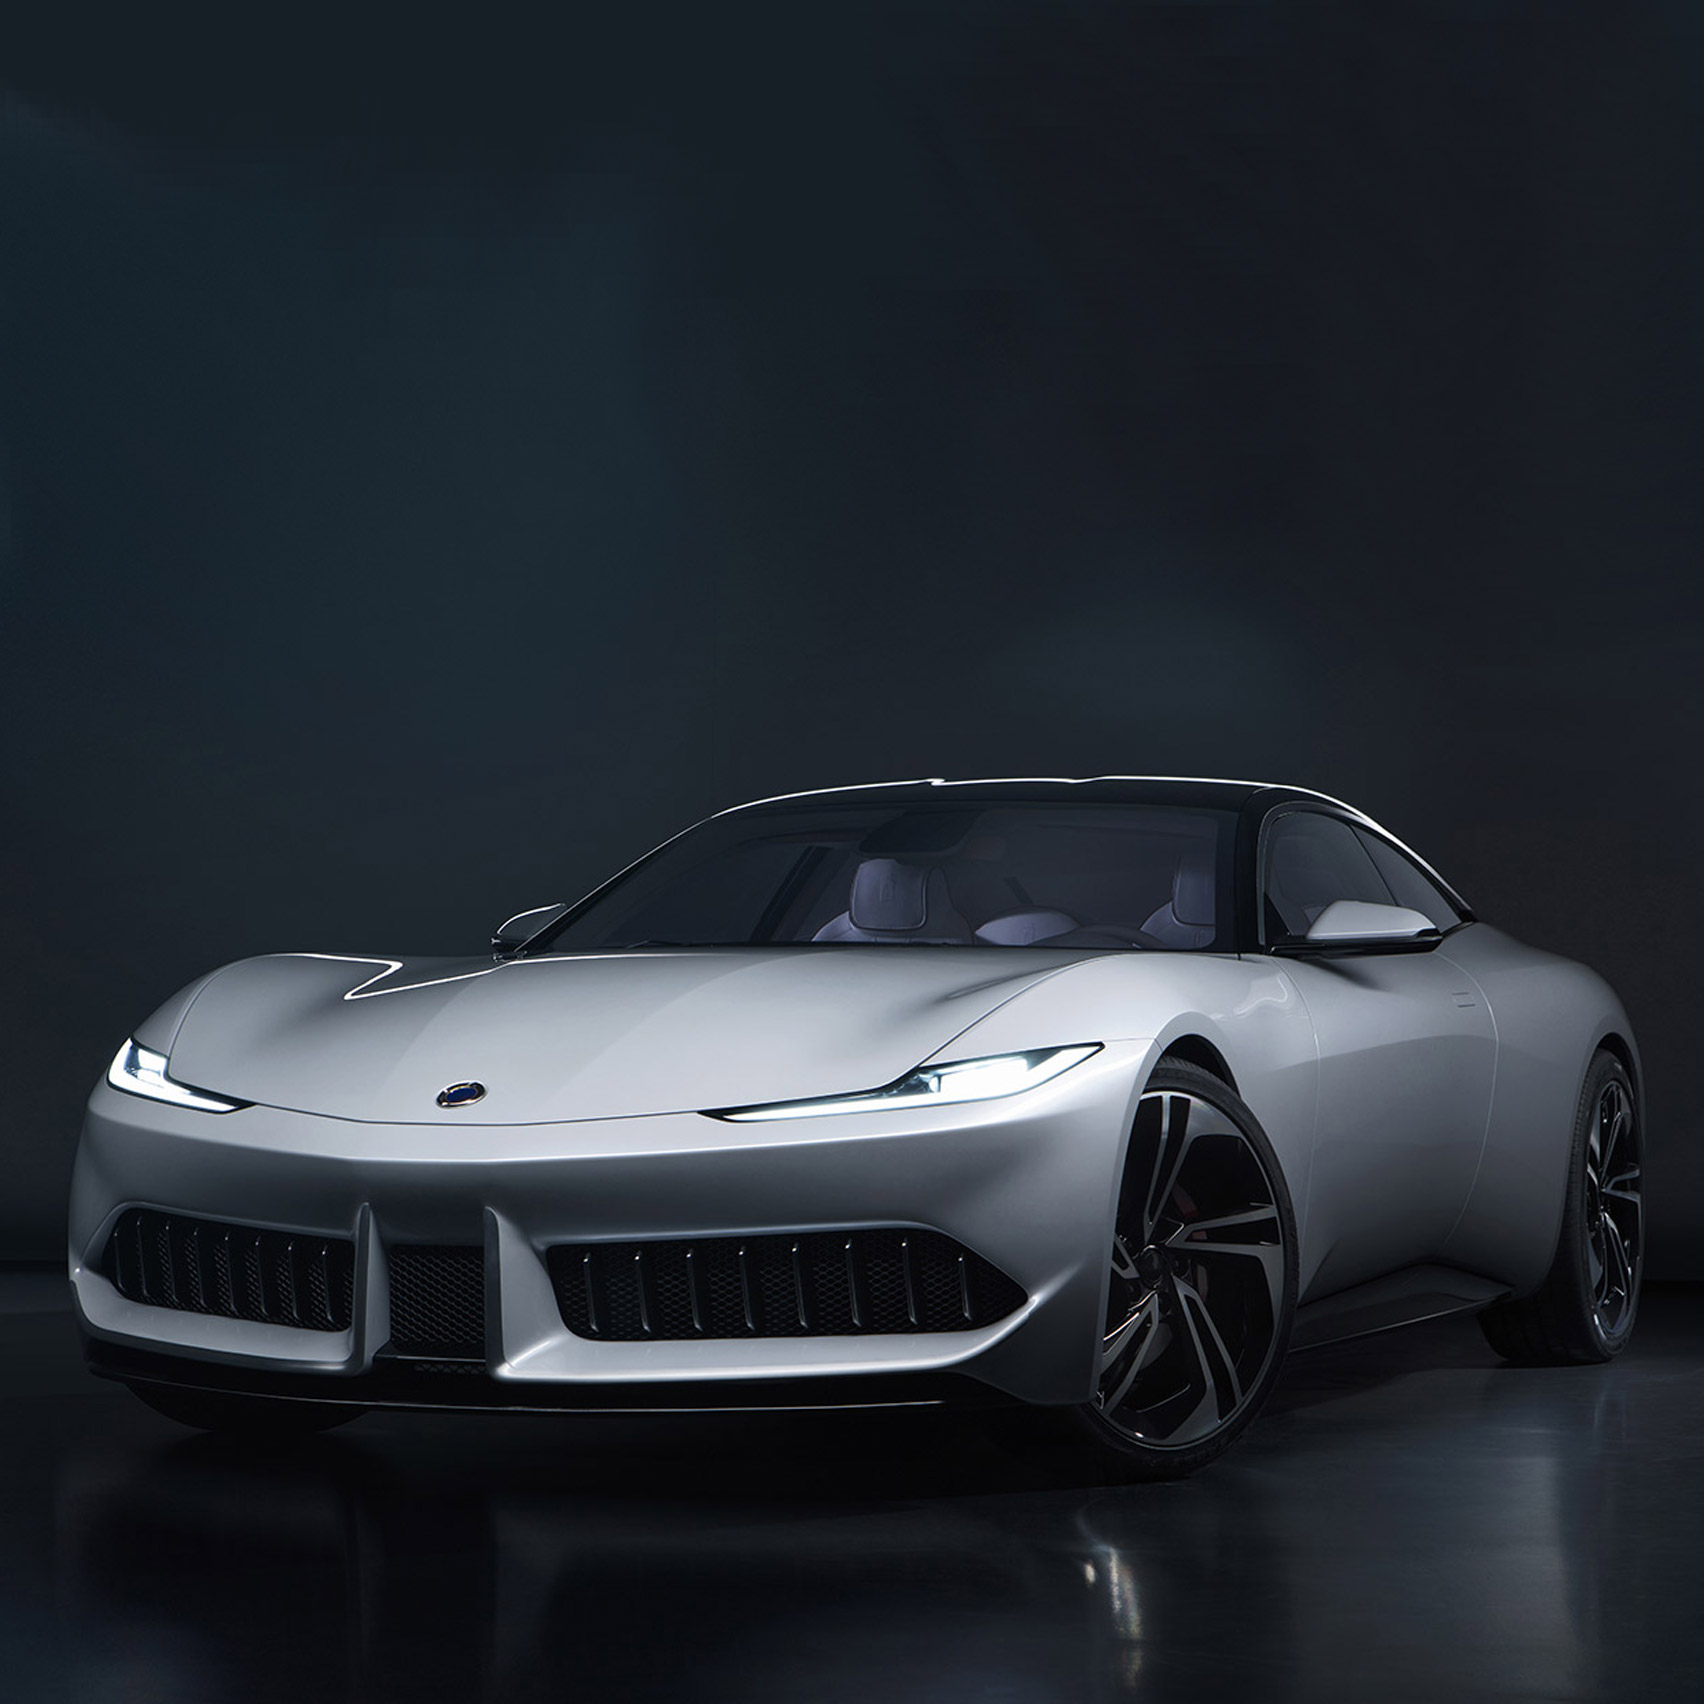 10 electric cars by Chinese car companies at Auto Shanghai 2019: Pininfarina GT by Karma Automotive